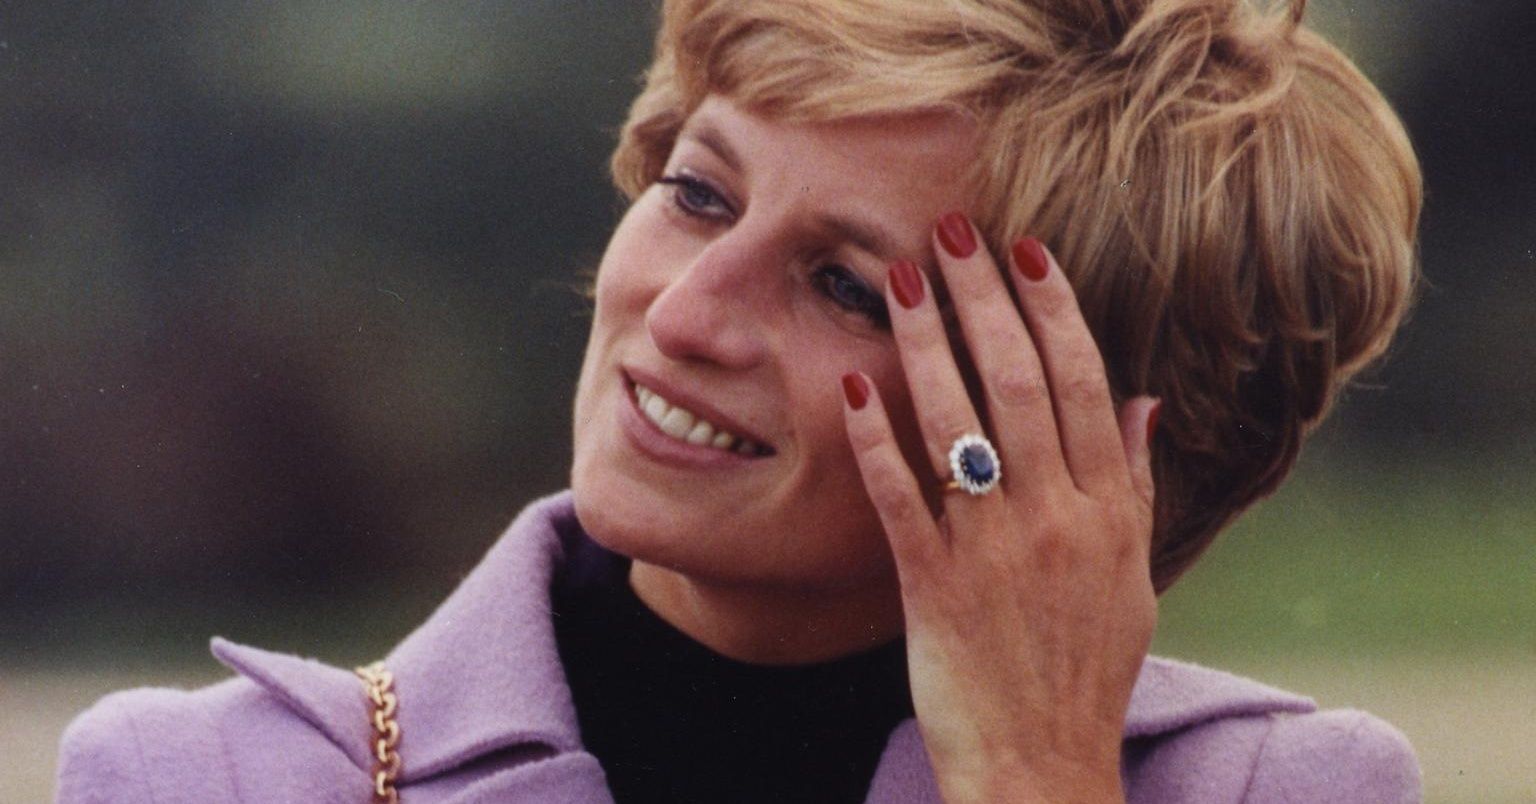 5 details about Princess Diana’s famous engagement ring you might not have known